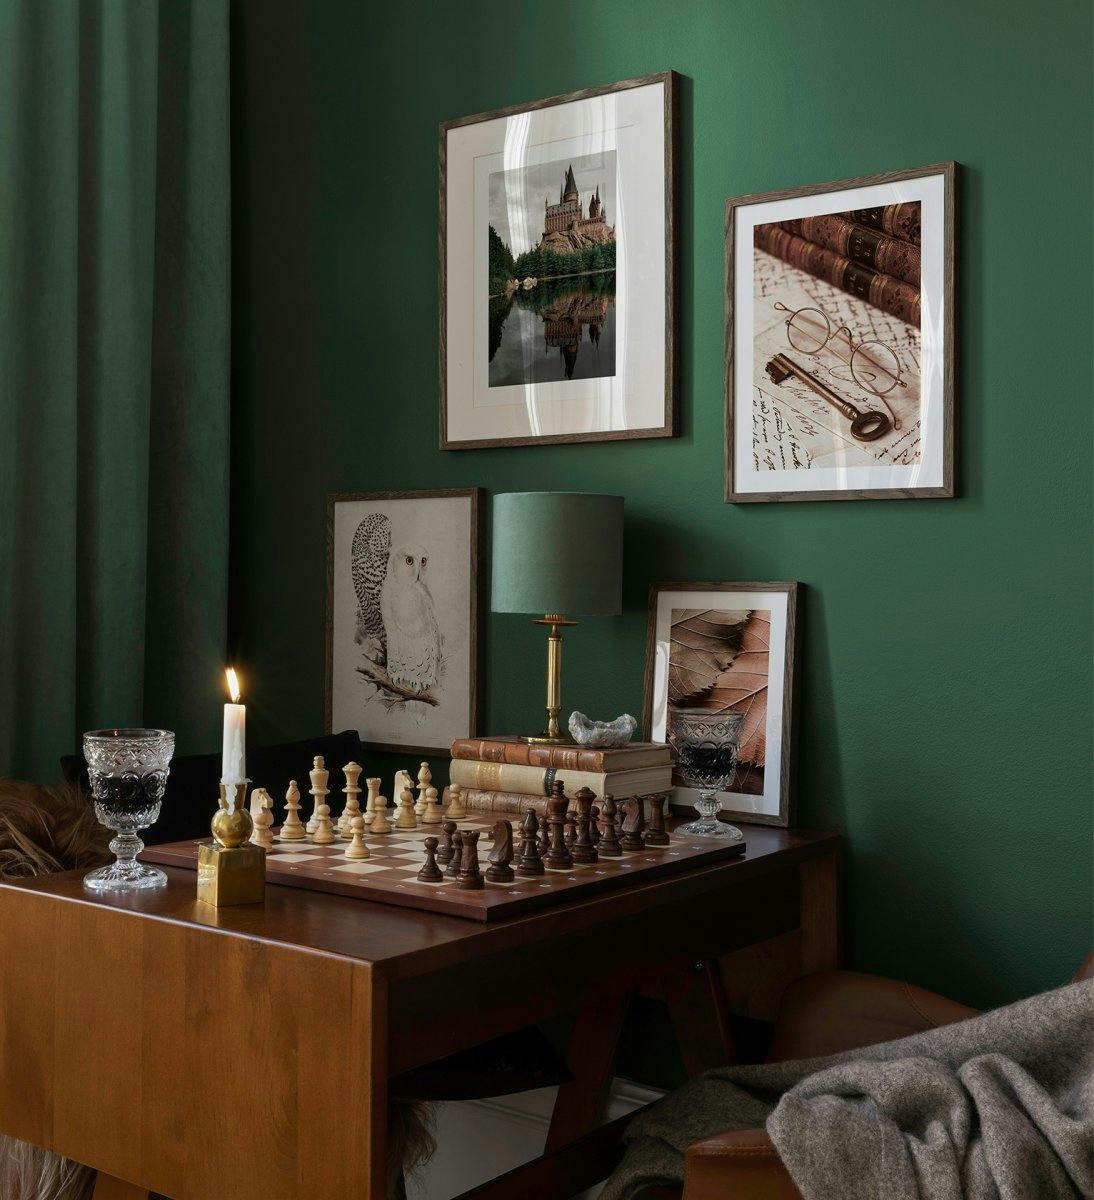 Gallery wall with dark wood frames and prints inspired by the magical woods for the gaming room or living room